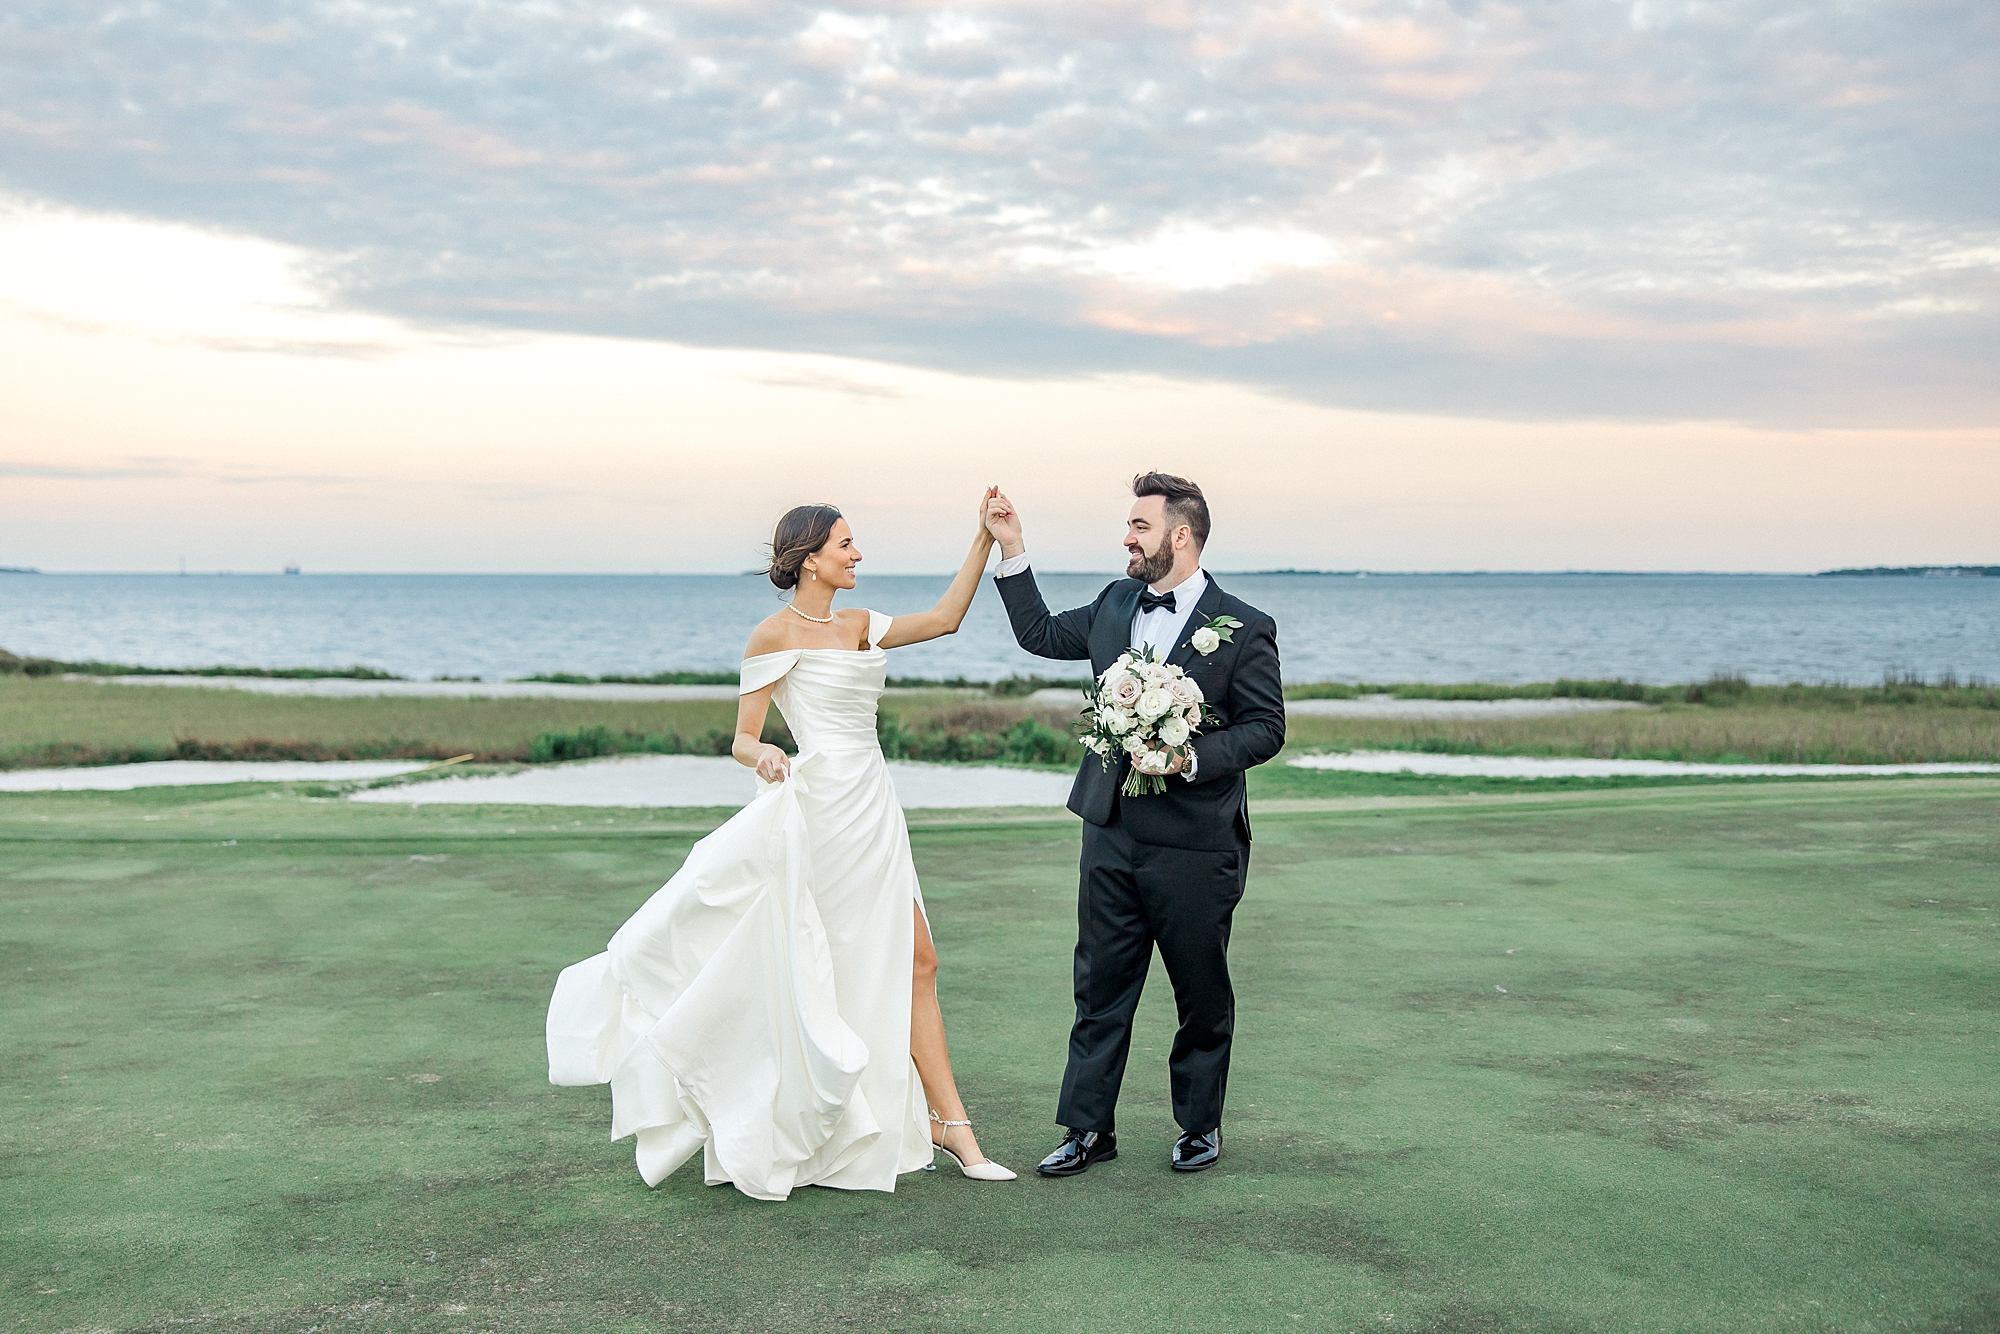 Newlywed portraits at sunset from Waterfront Charleston Wedding at Patriots Point Links